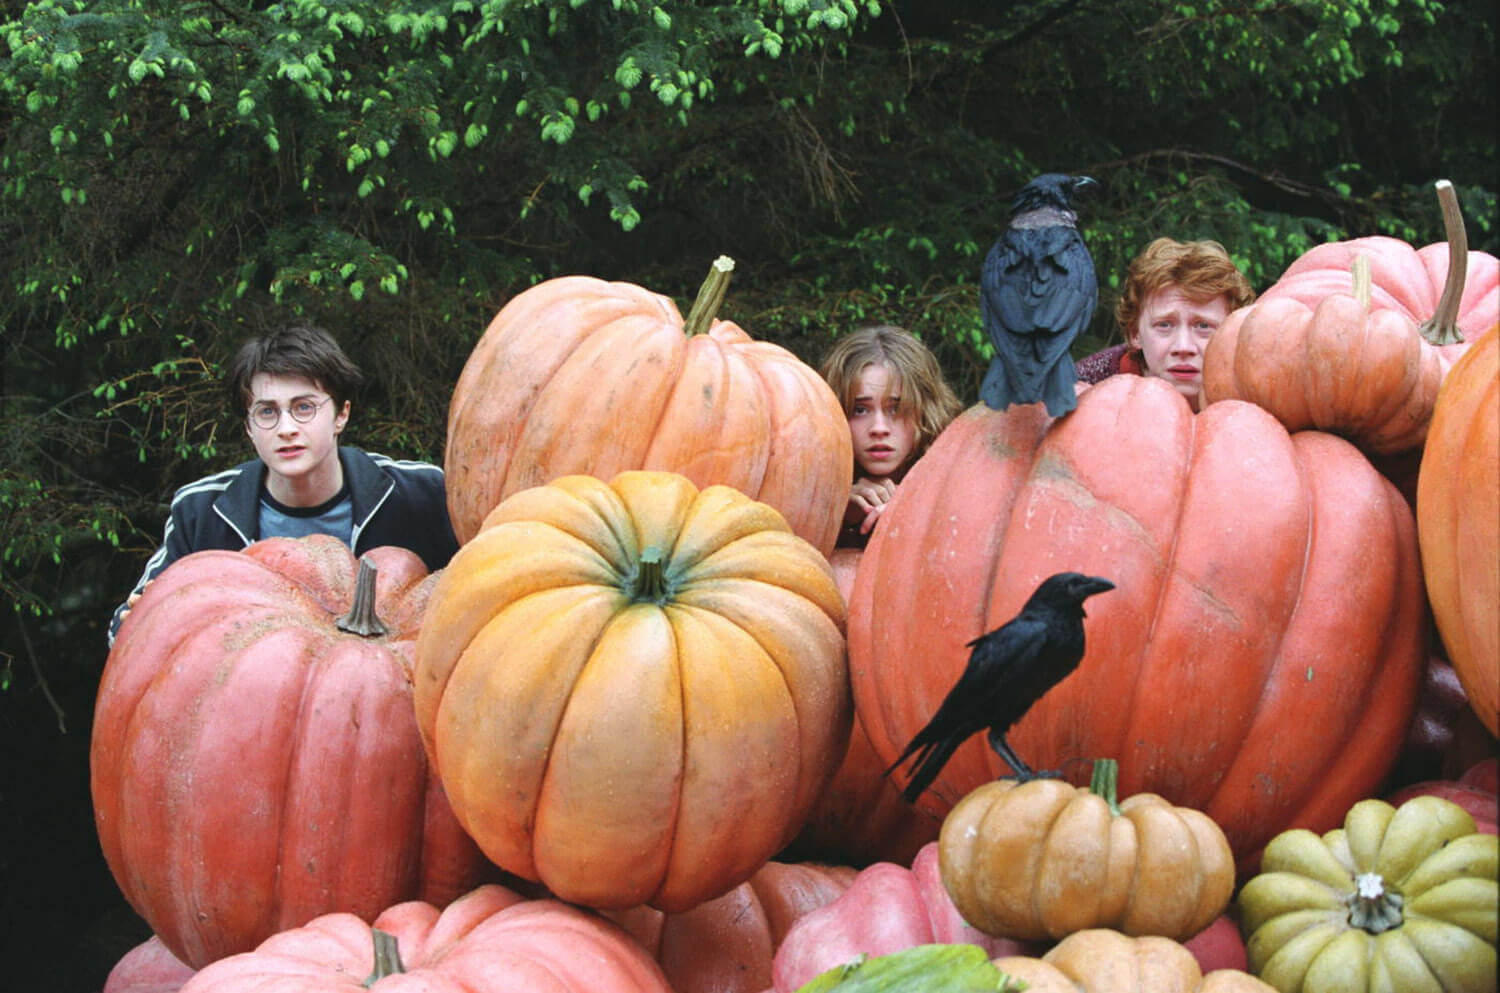 harry potter and the prisoner of azkaban movies set in pumpkin patches